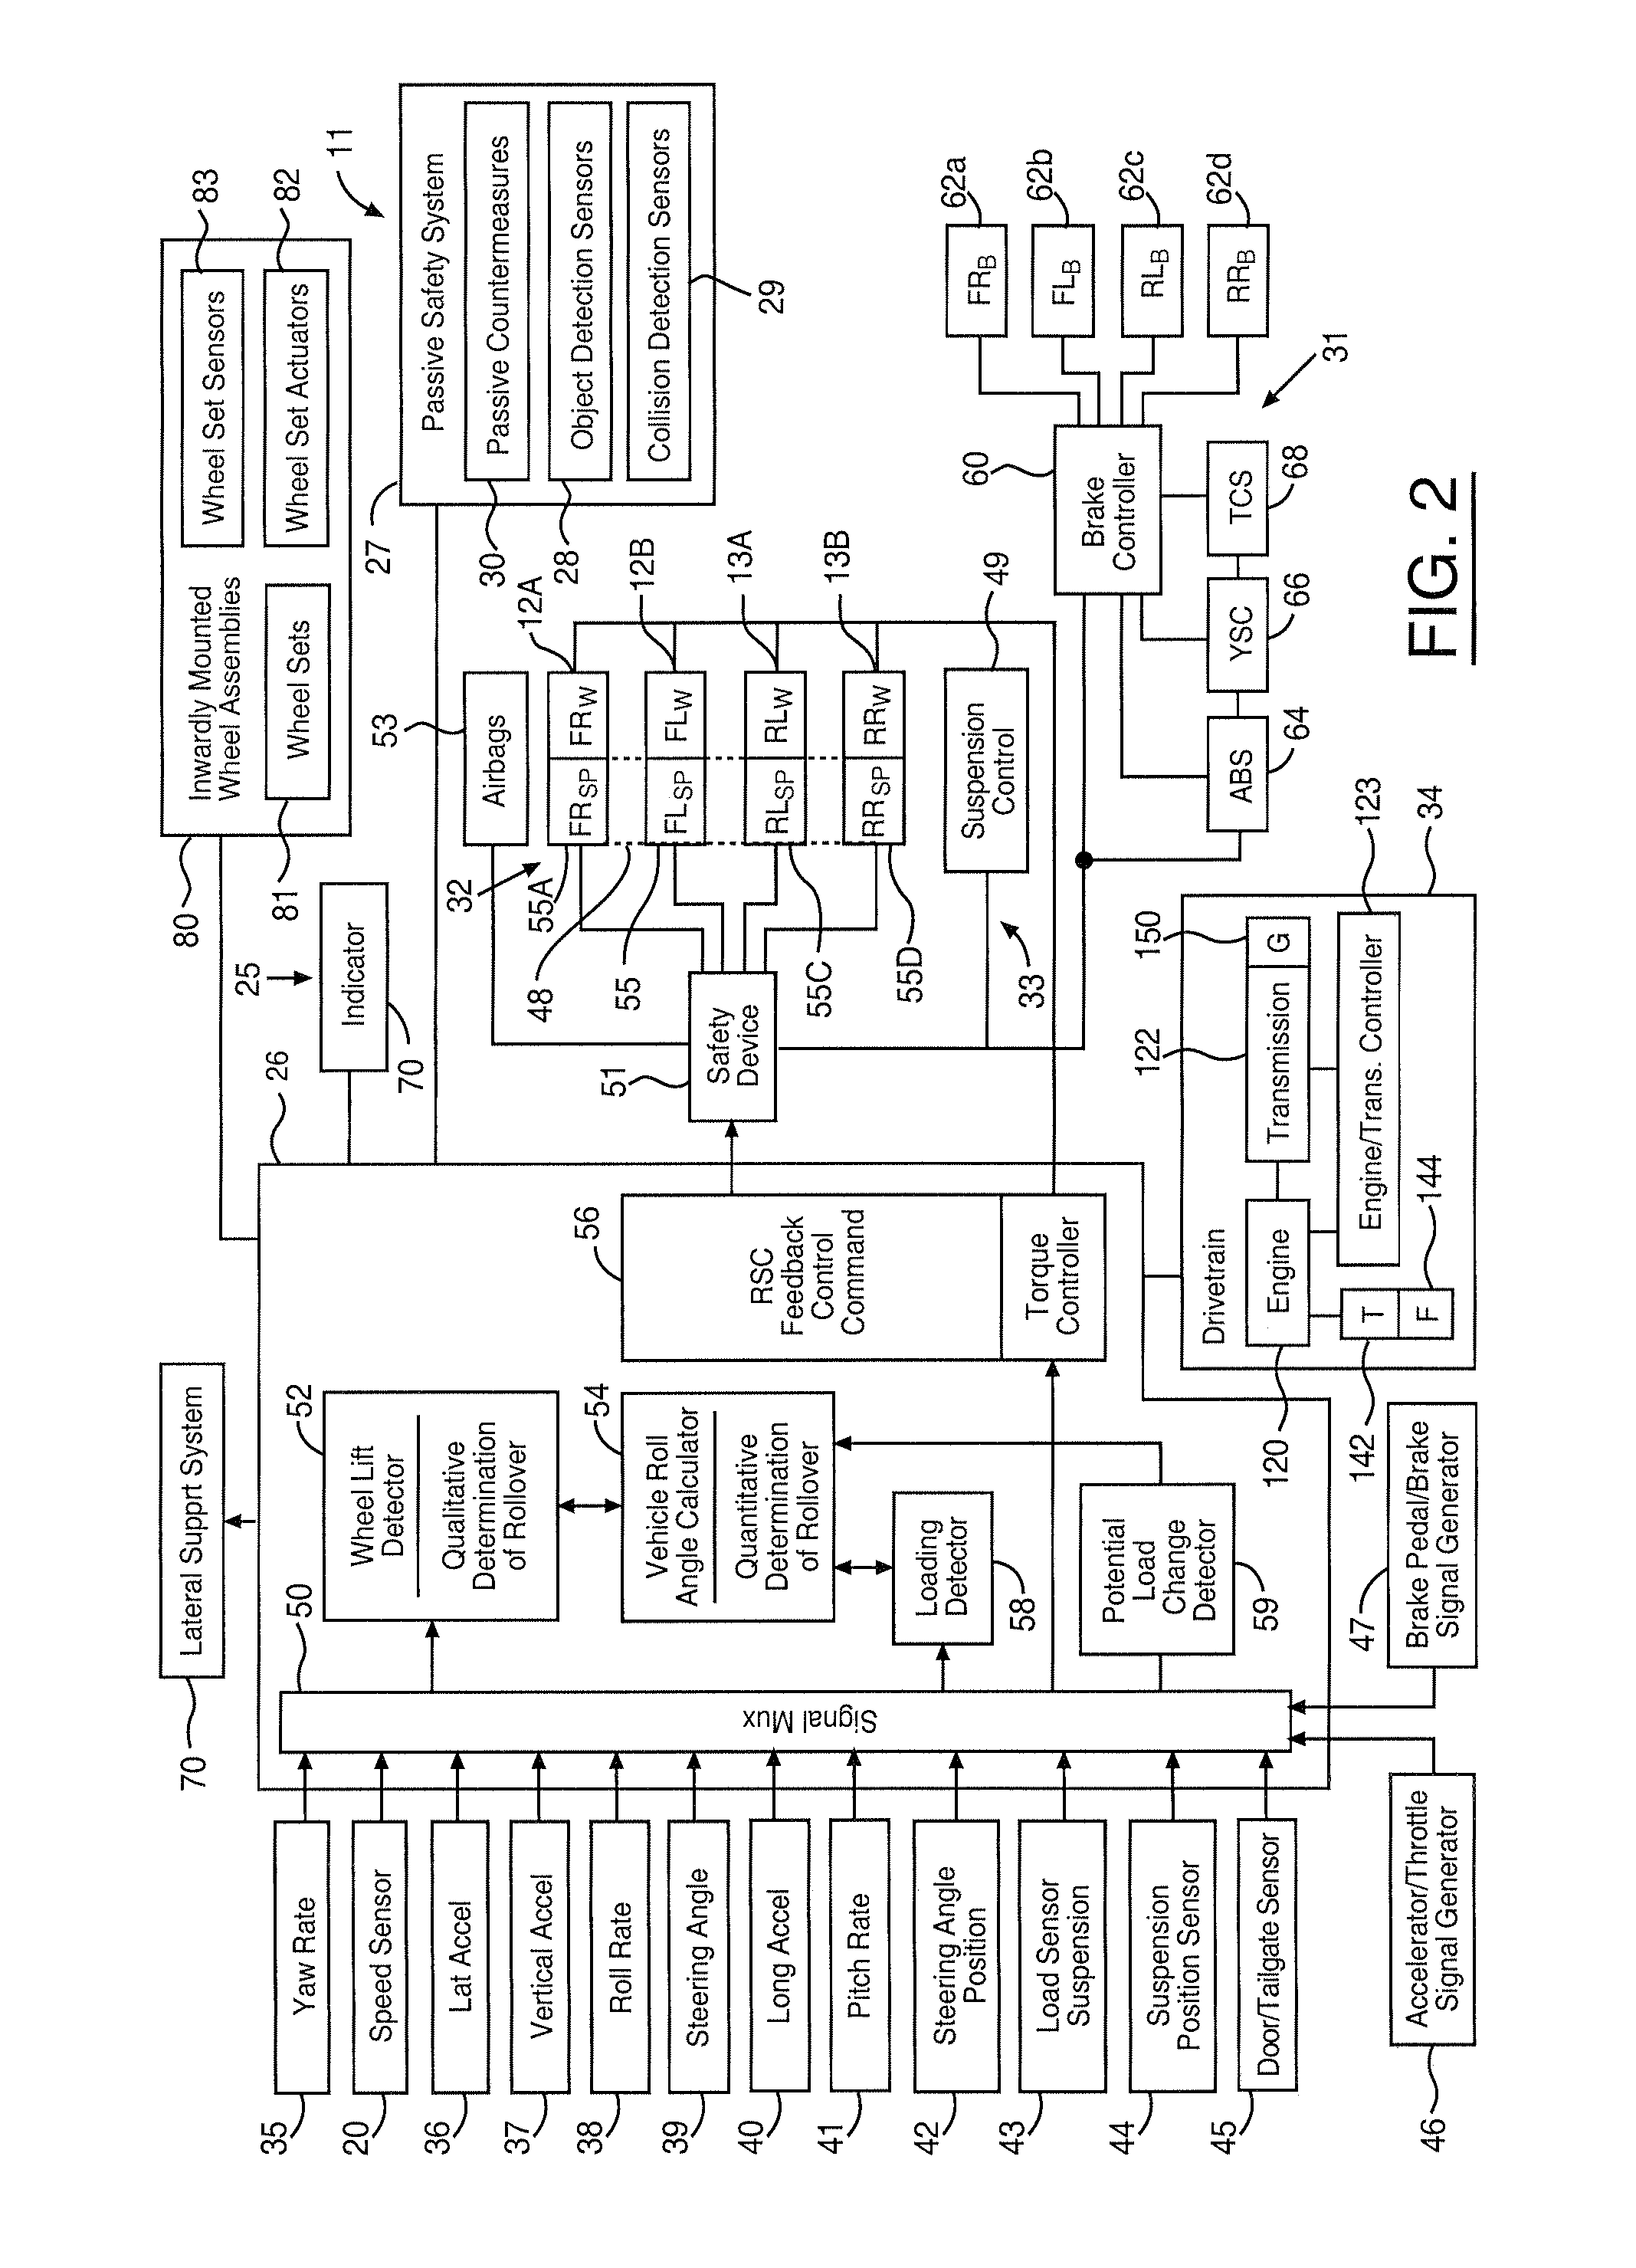 Tripped rollover mitigation and prevention systems and methods